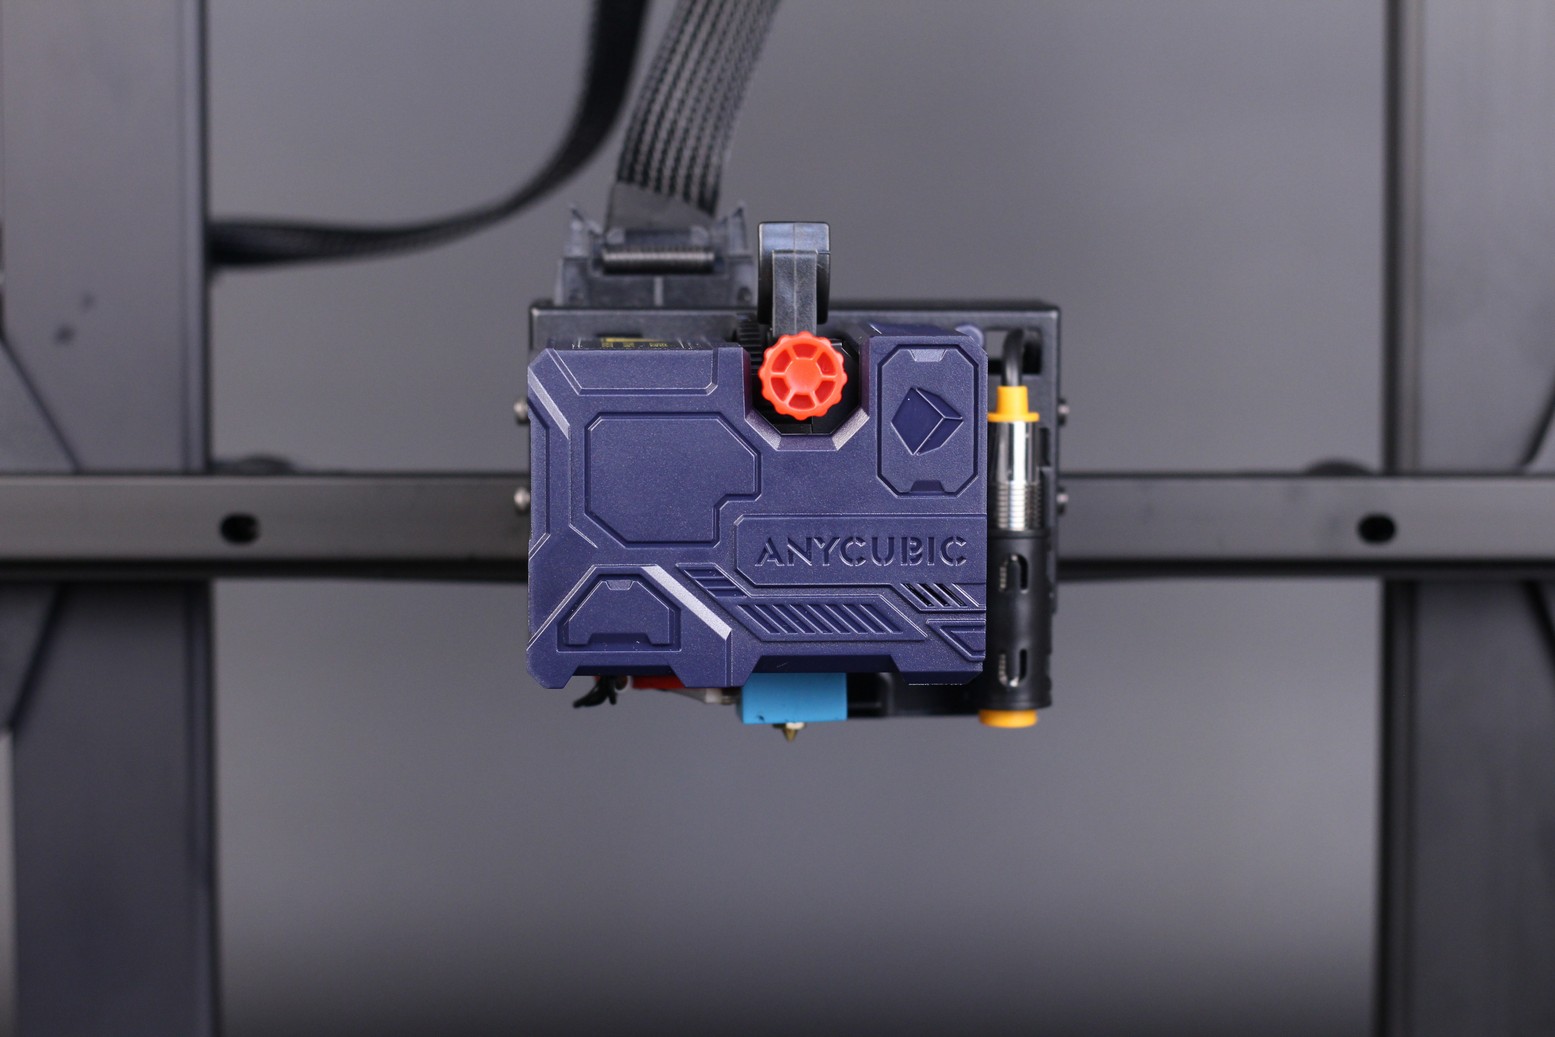 Anycubic Kobra Direct Drive Extruder 3 | Anycubic Kobra Review: The New Budget Standard